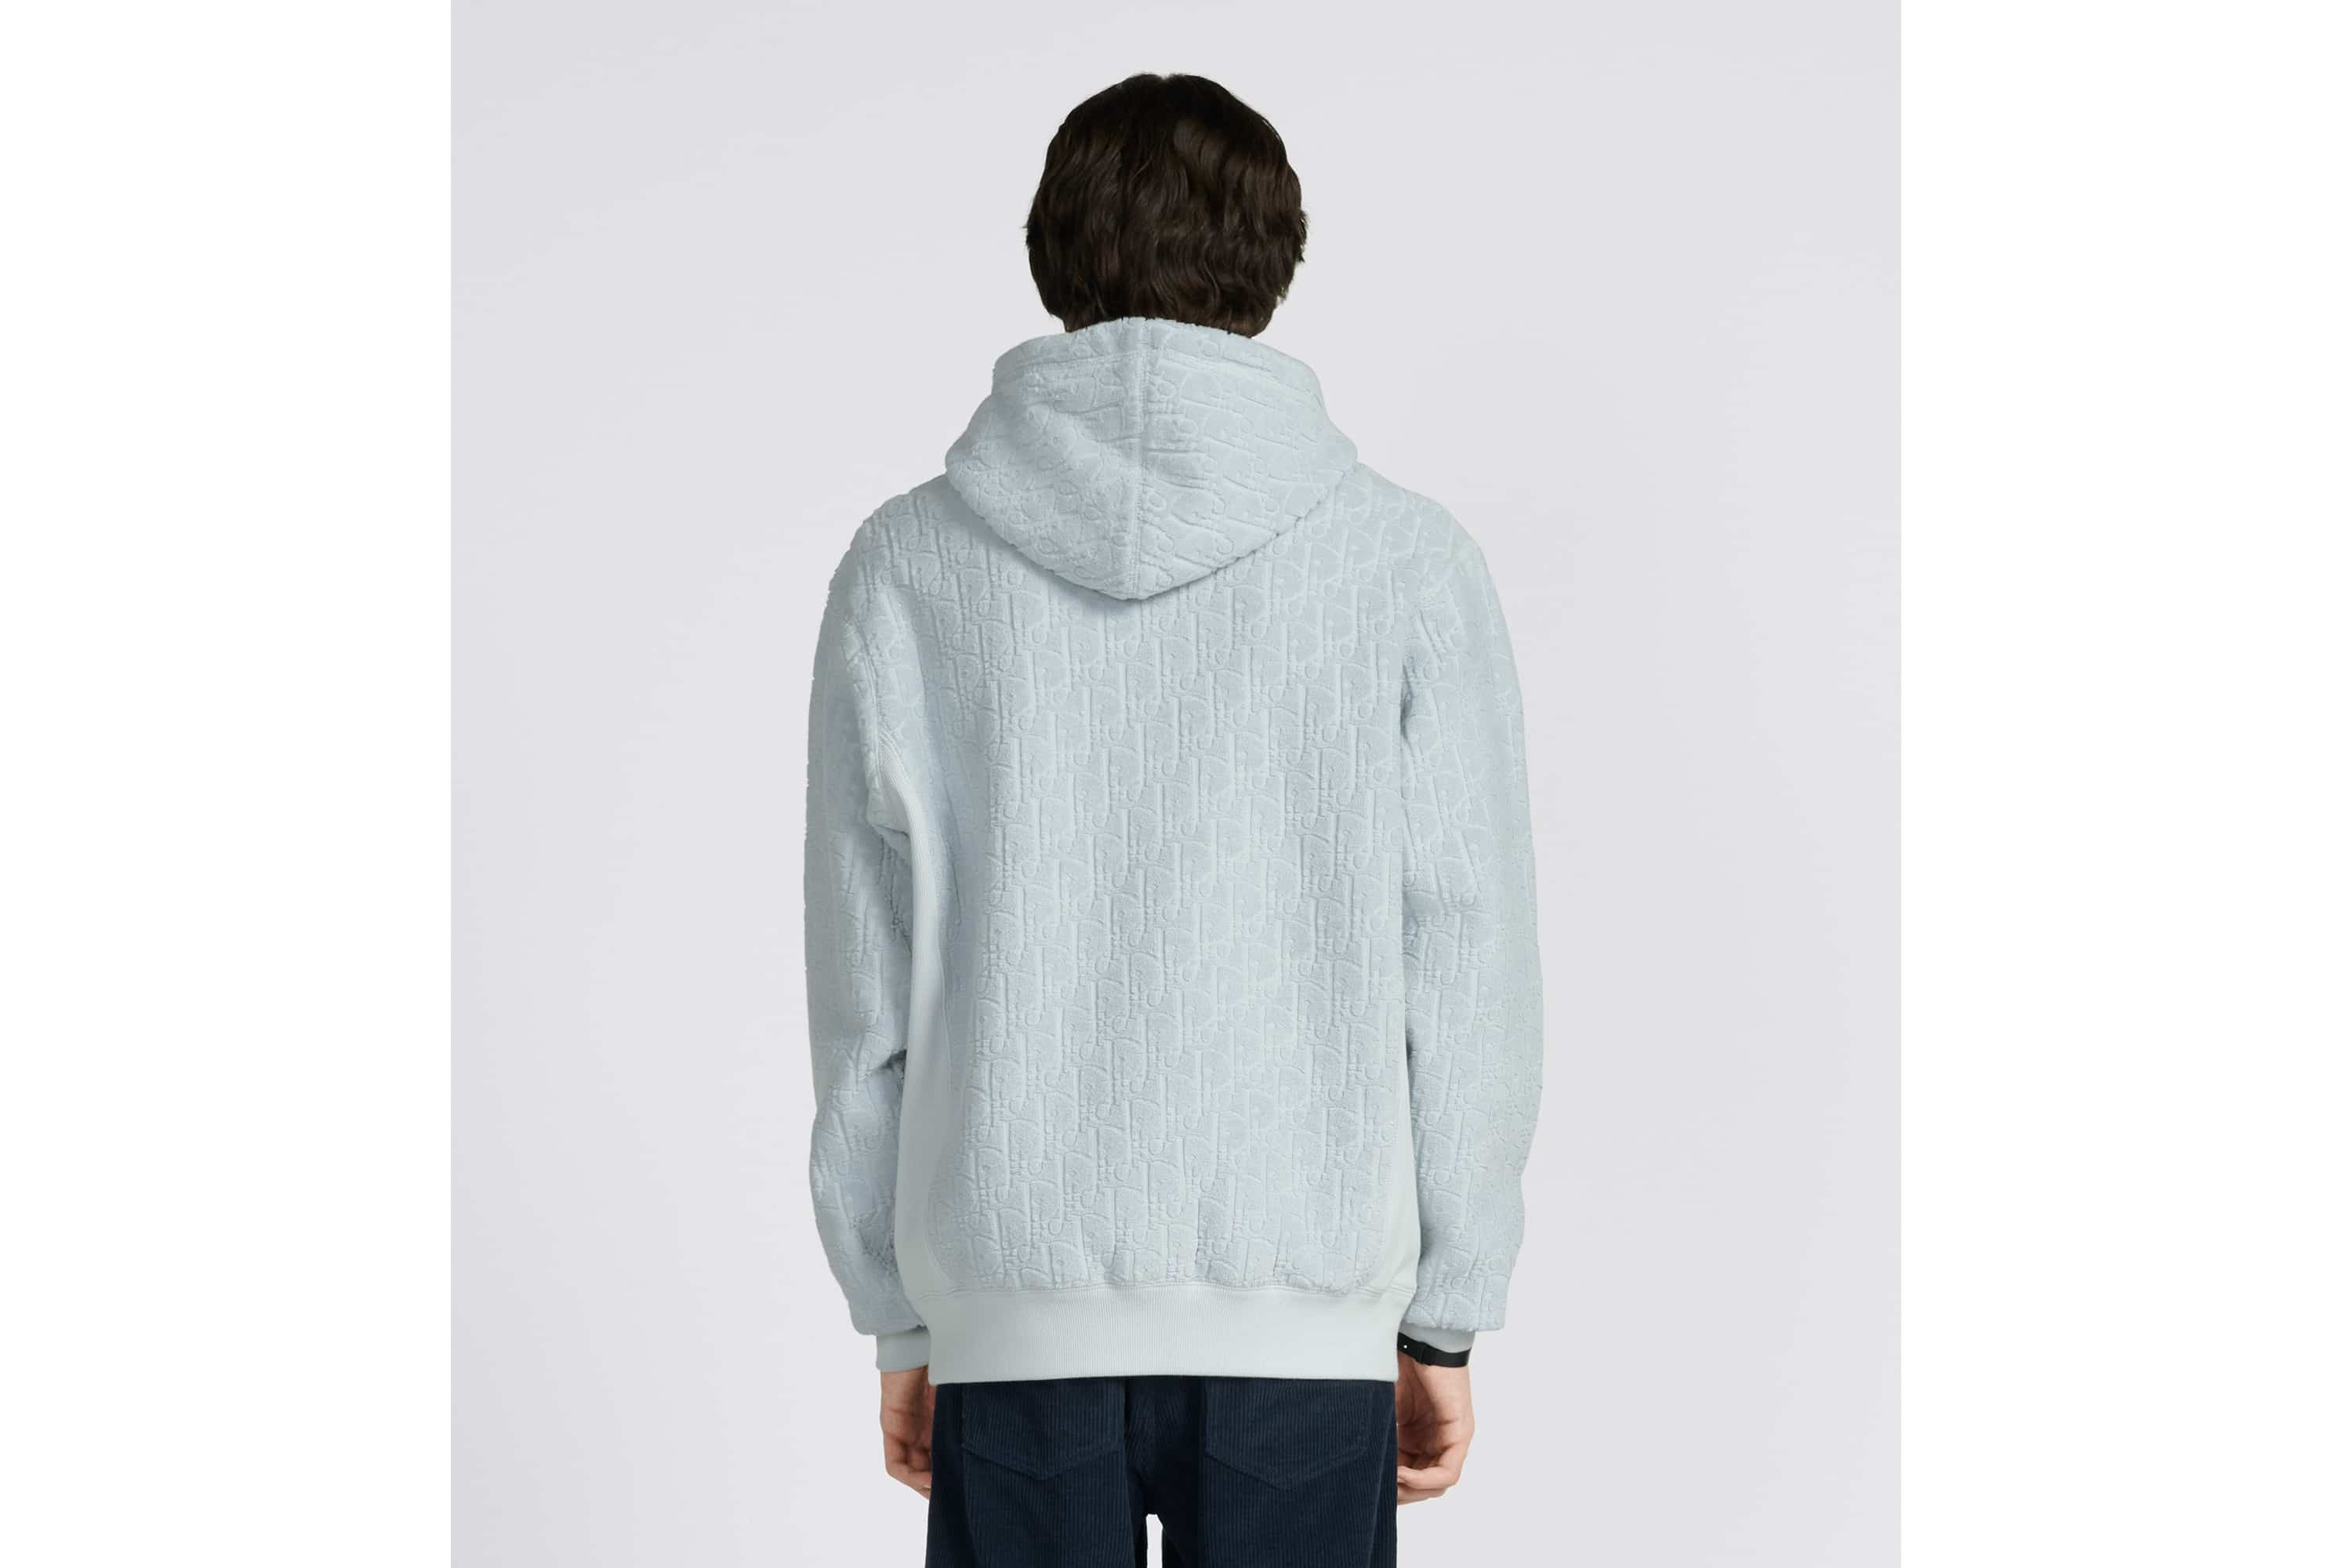 Dior Oblique Relaxed-Fit Hooded Sweatshirt Blue Terry Cotton